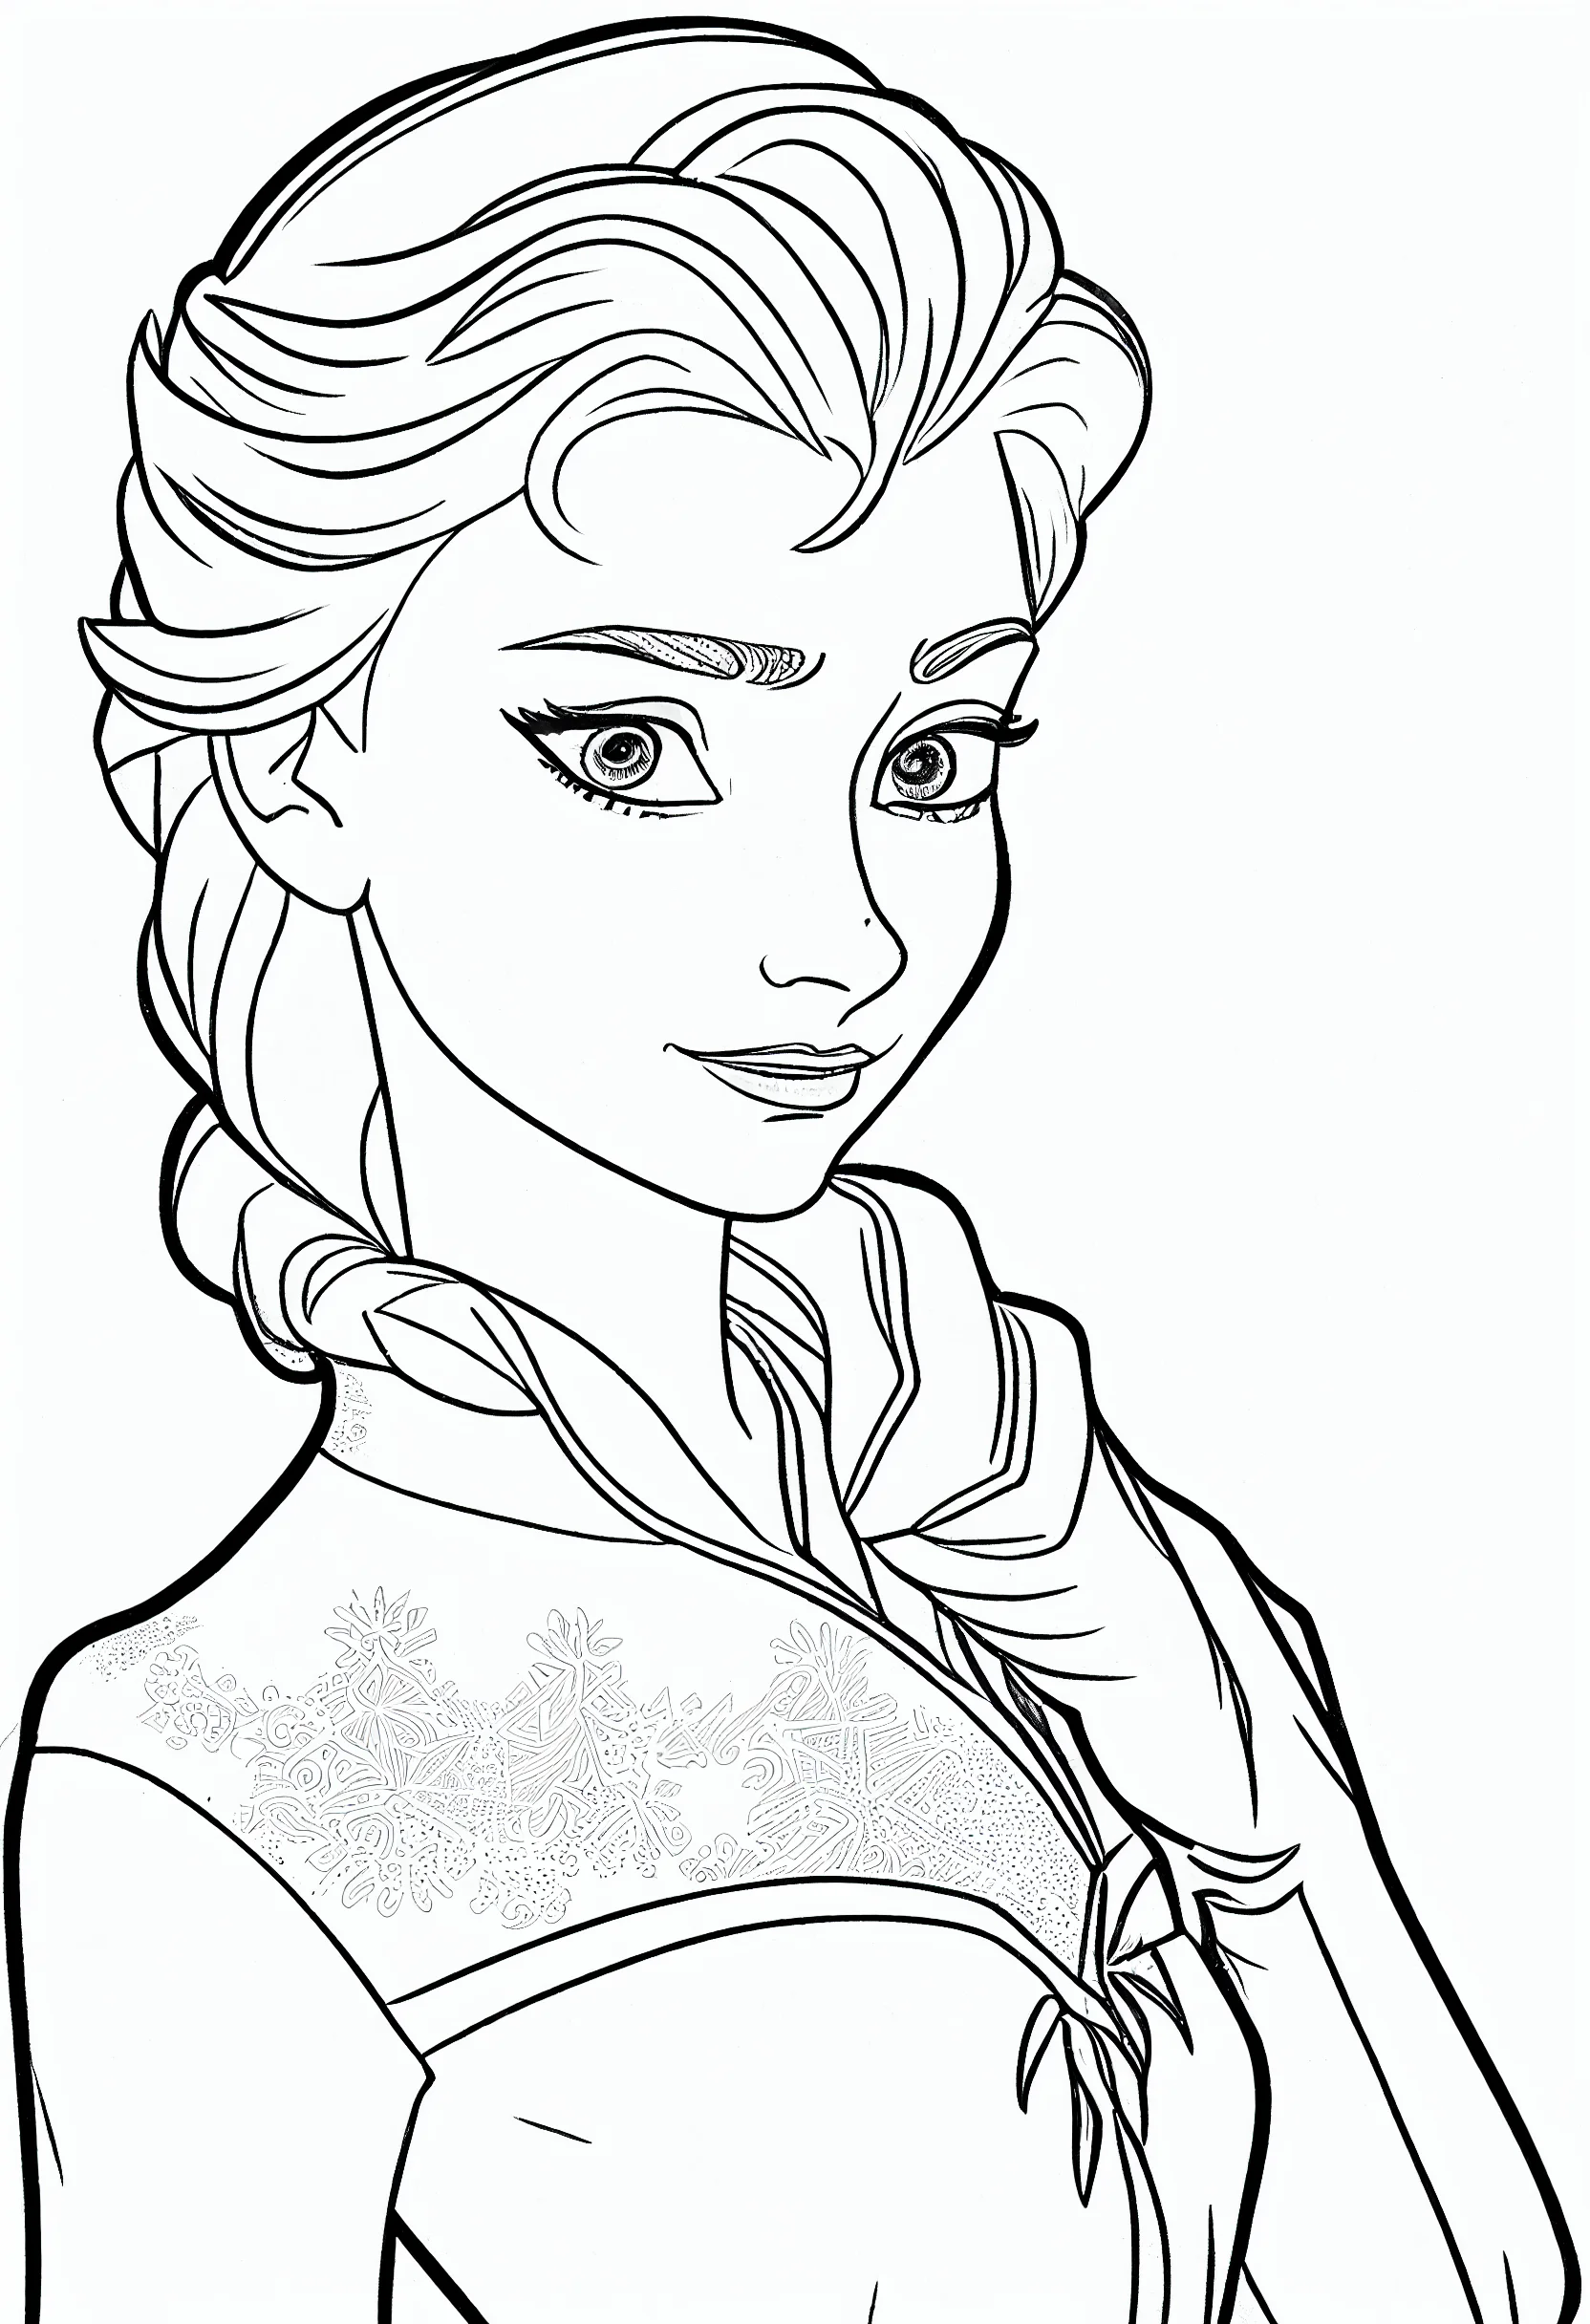 Disneys Frozen Printable Coloring Pages